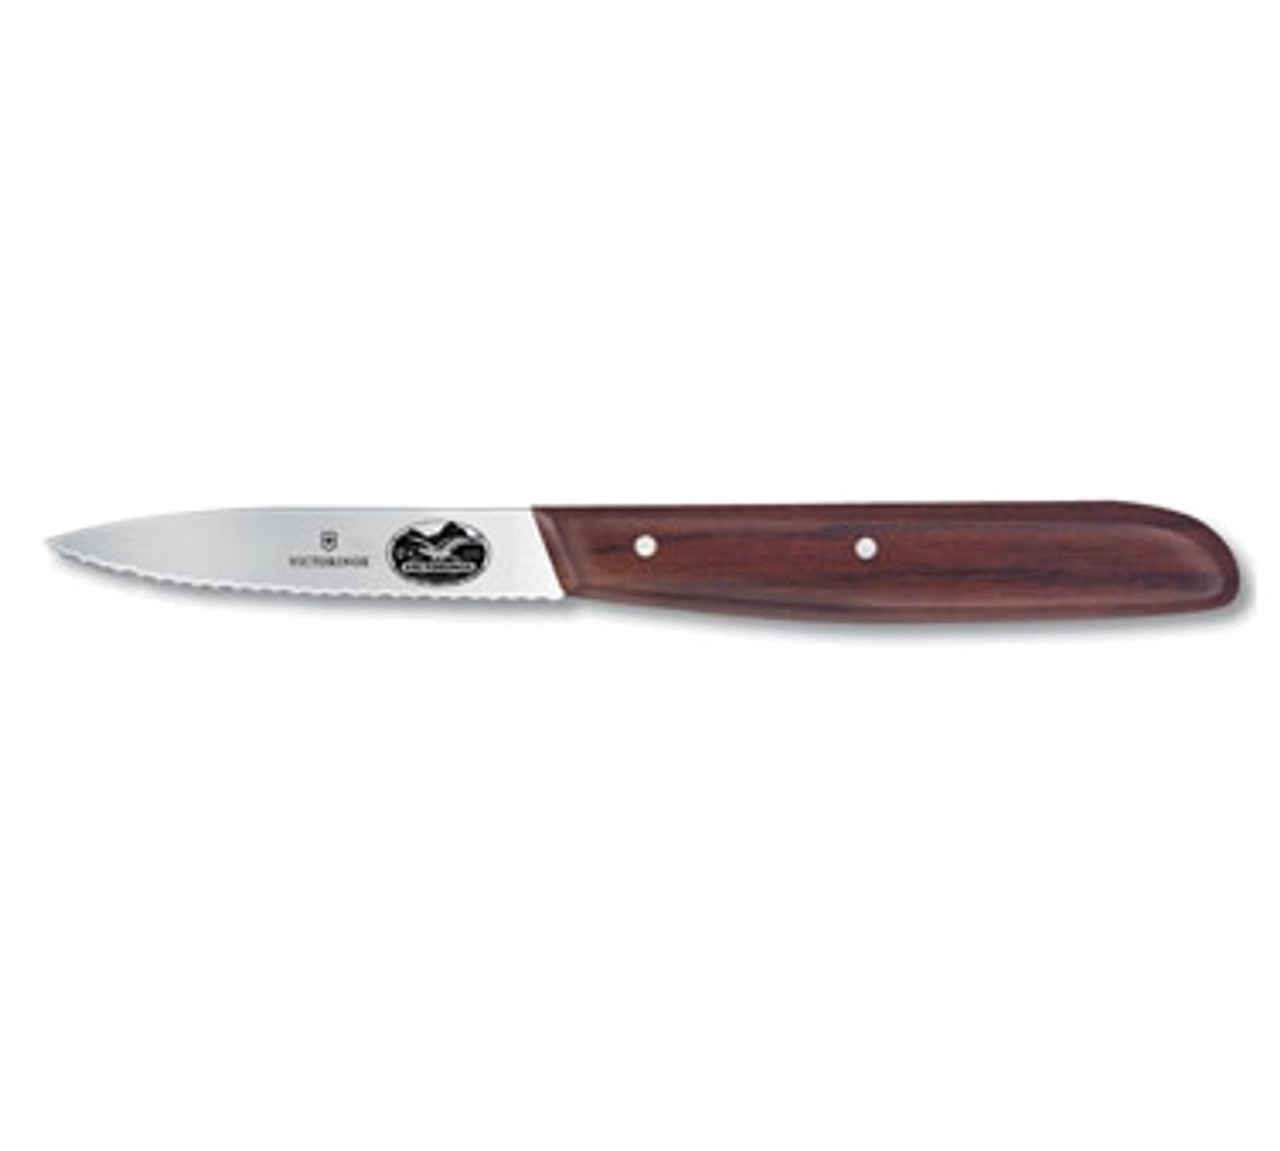 Victorinox 5.3030 3.25" Paring Knife - Spear Point w/ Wavy Edge -Rosewood